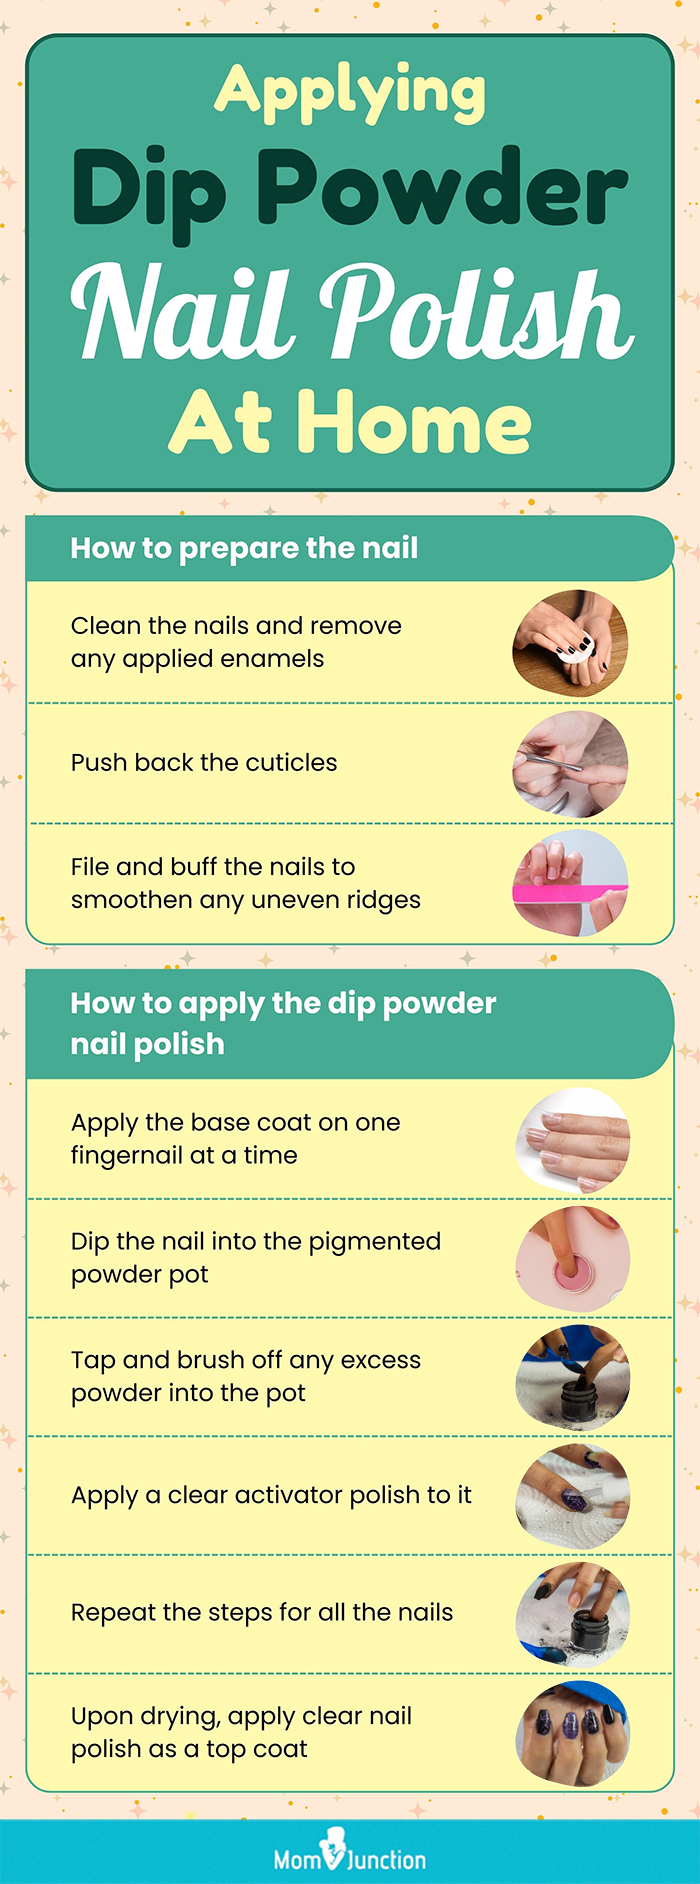 Methods For The Clean Application Of Dip Powder Nail Polish At Home (infographic)